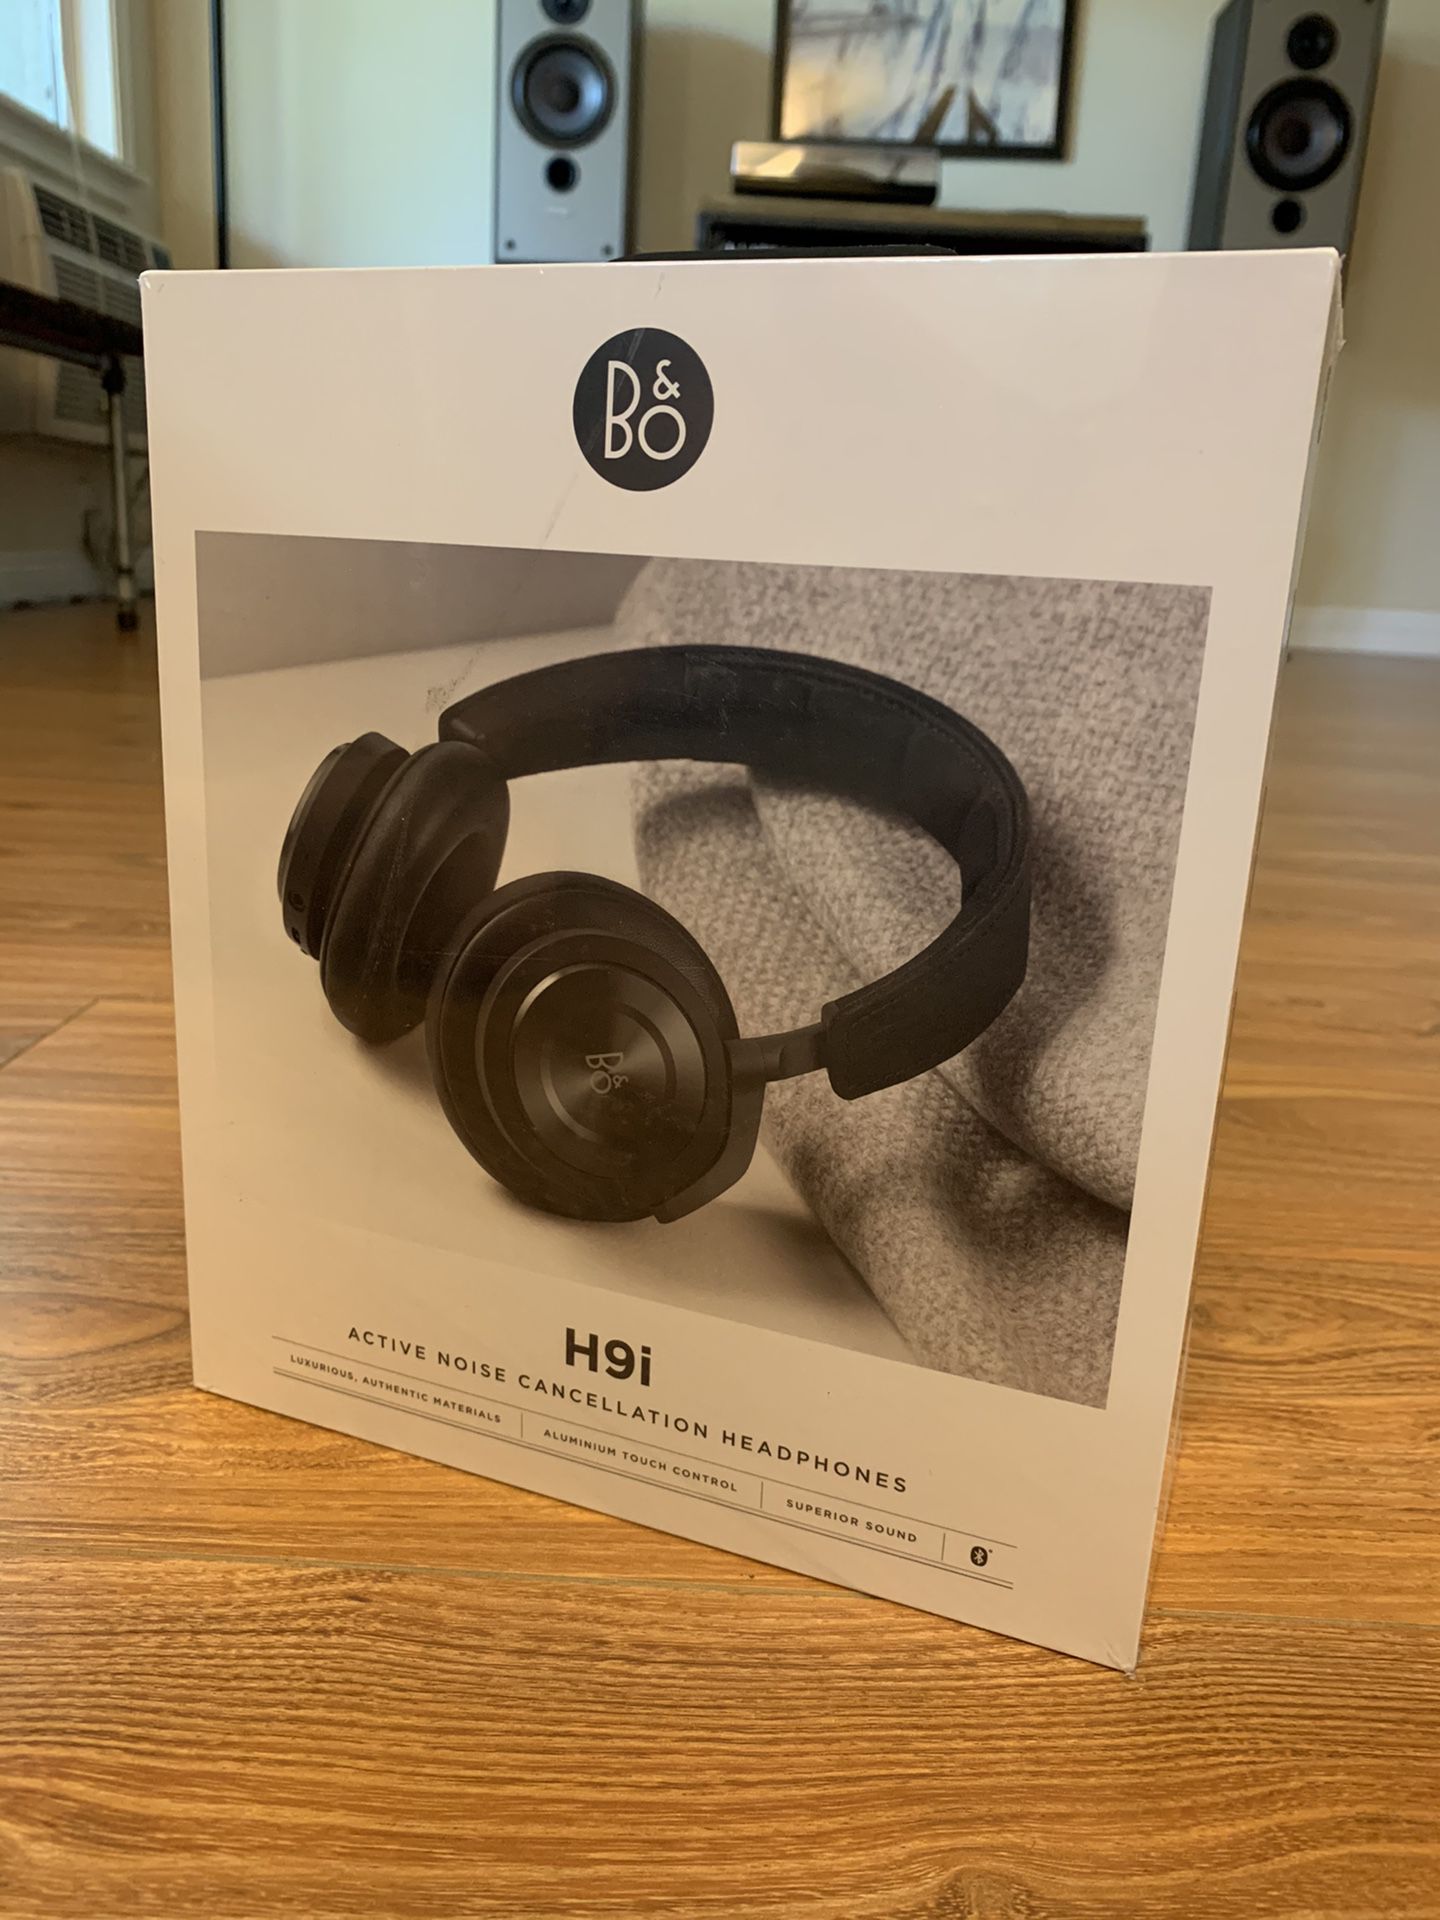 Bang & Olufsen Beoplay H9i Noise Cancellation Bluetooth Headphones